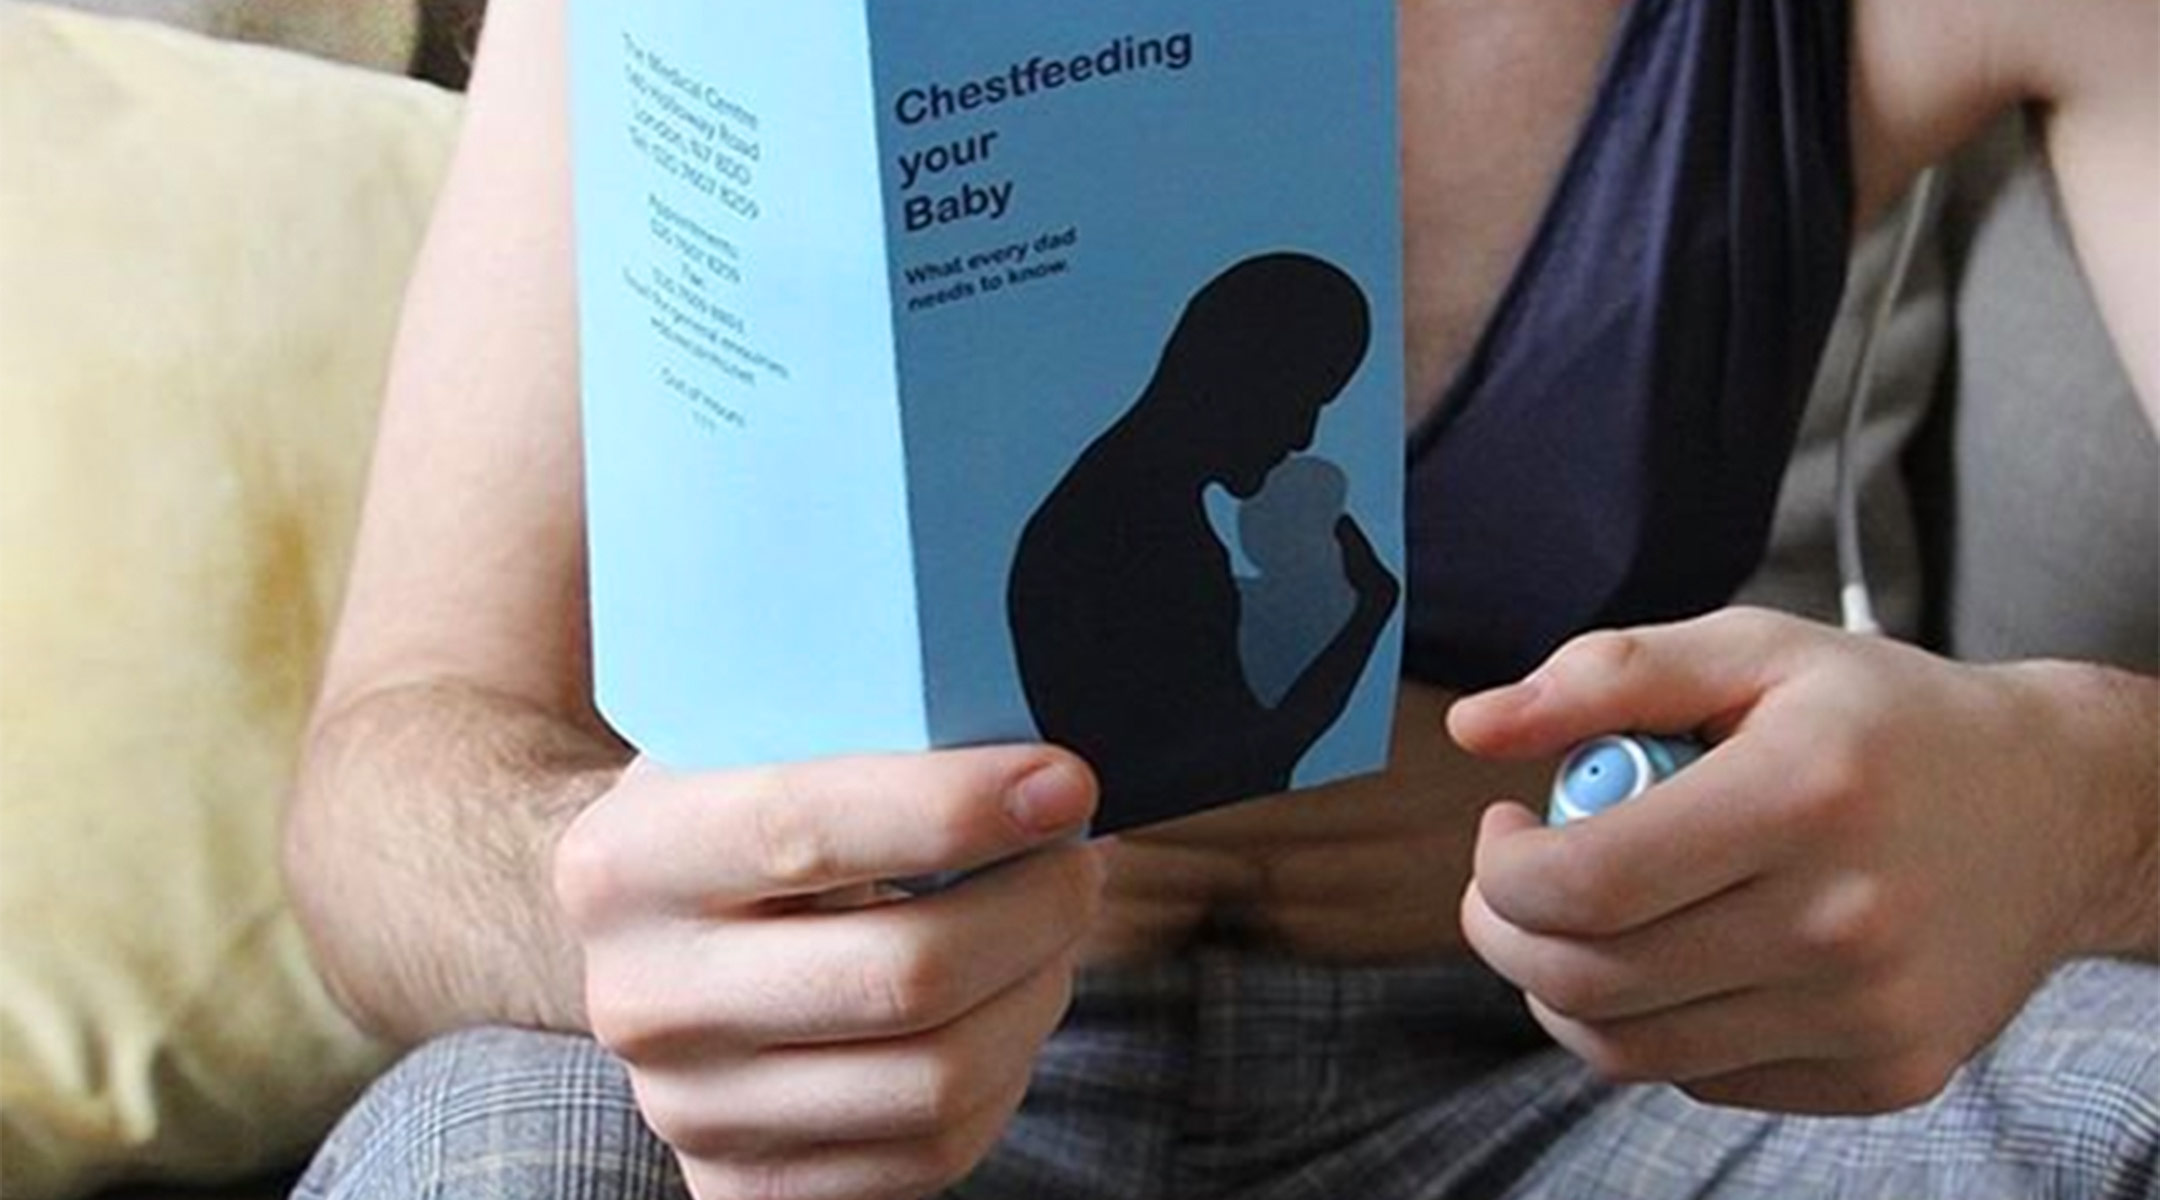 award winning prototype for a chestfeeding kit for dads to feed their babies